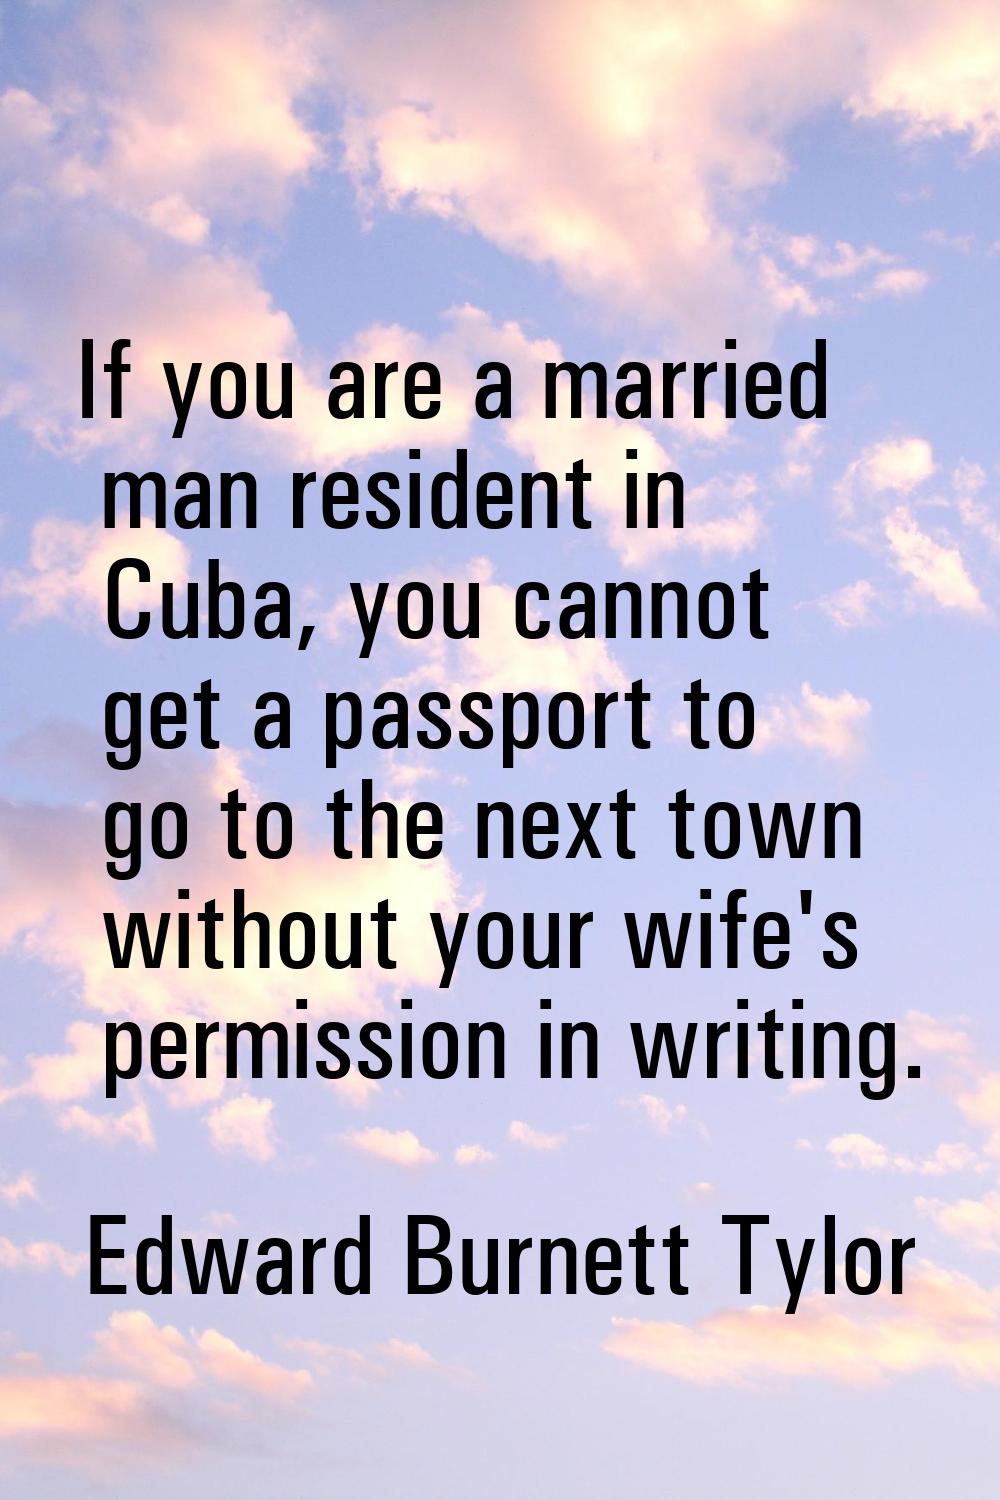 If you are a married man resident in Cuba, you cannot get a passport to go to the next town without